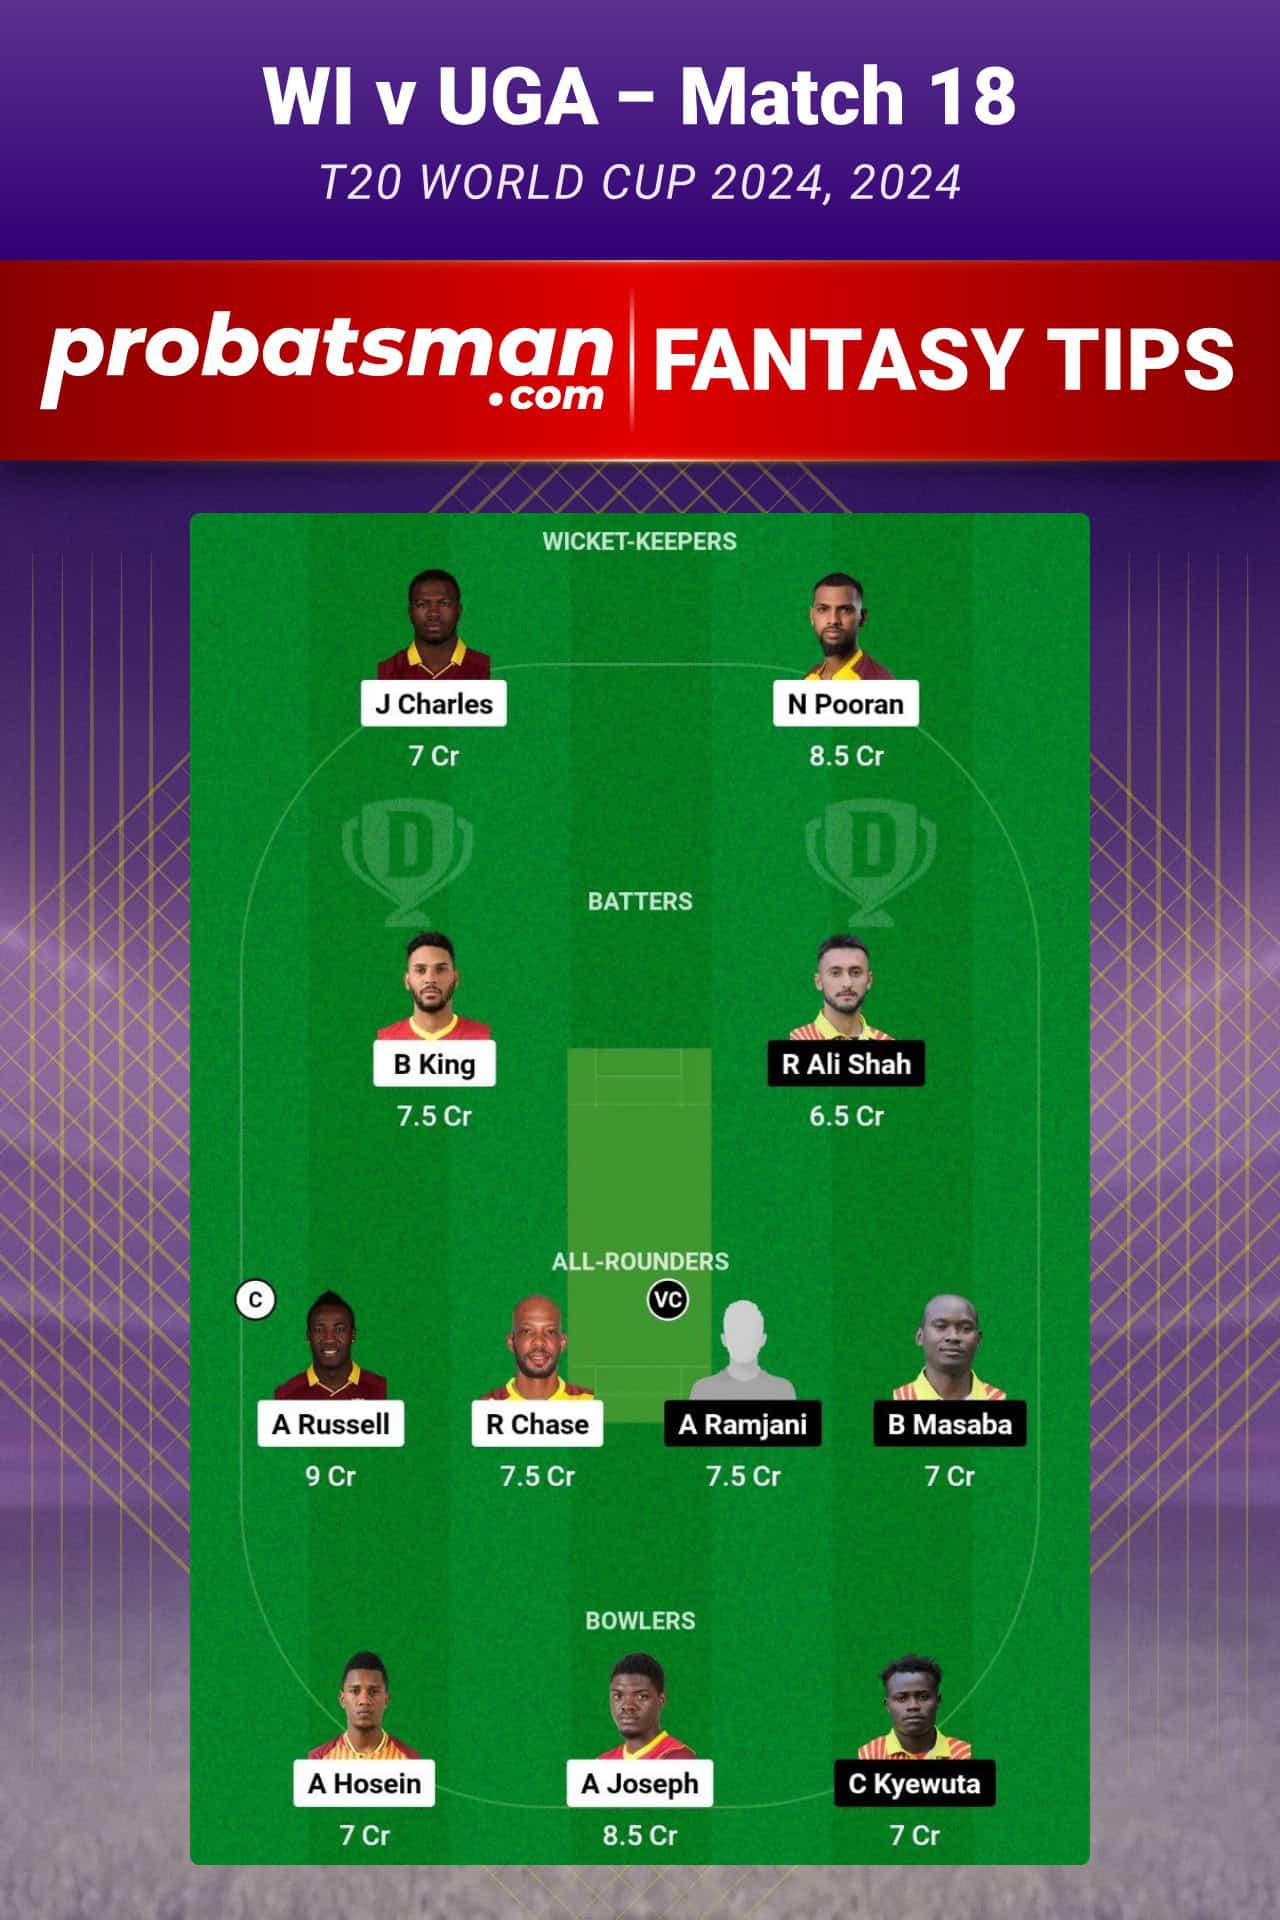 WI vs UGA Dream11 Prediction For Match 18 of T20 World Cup 2024